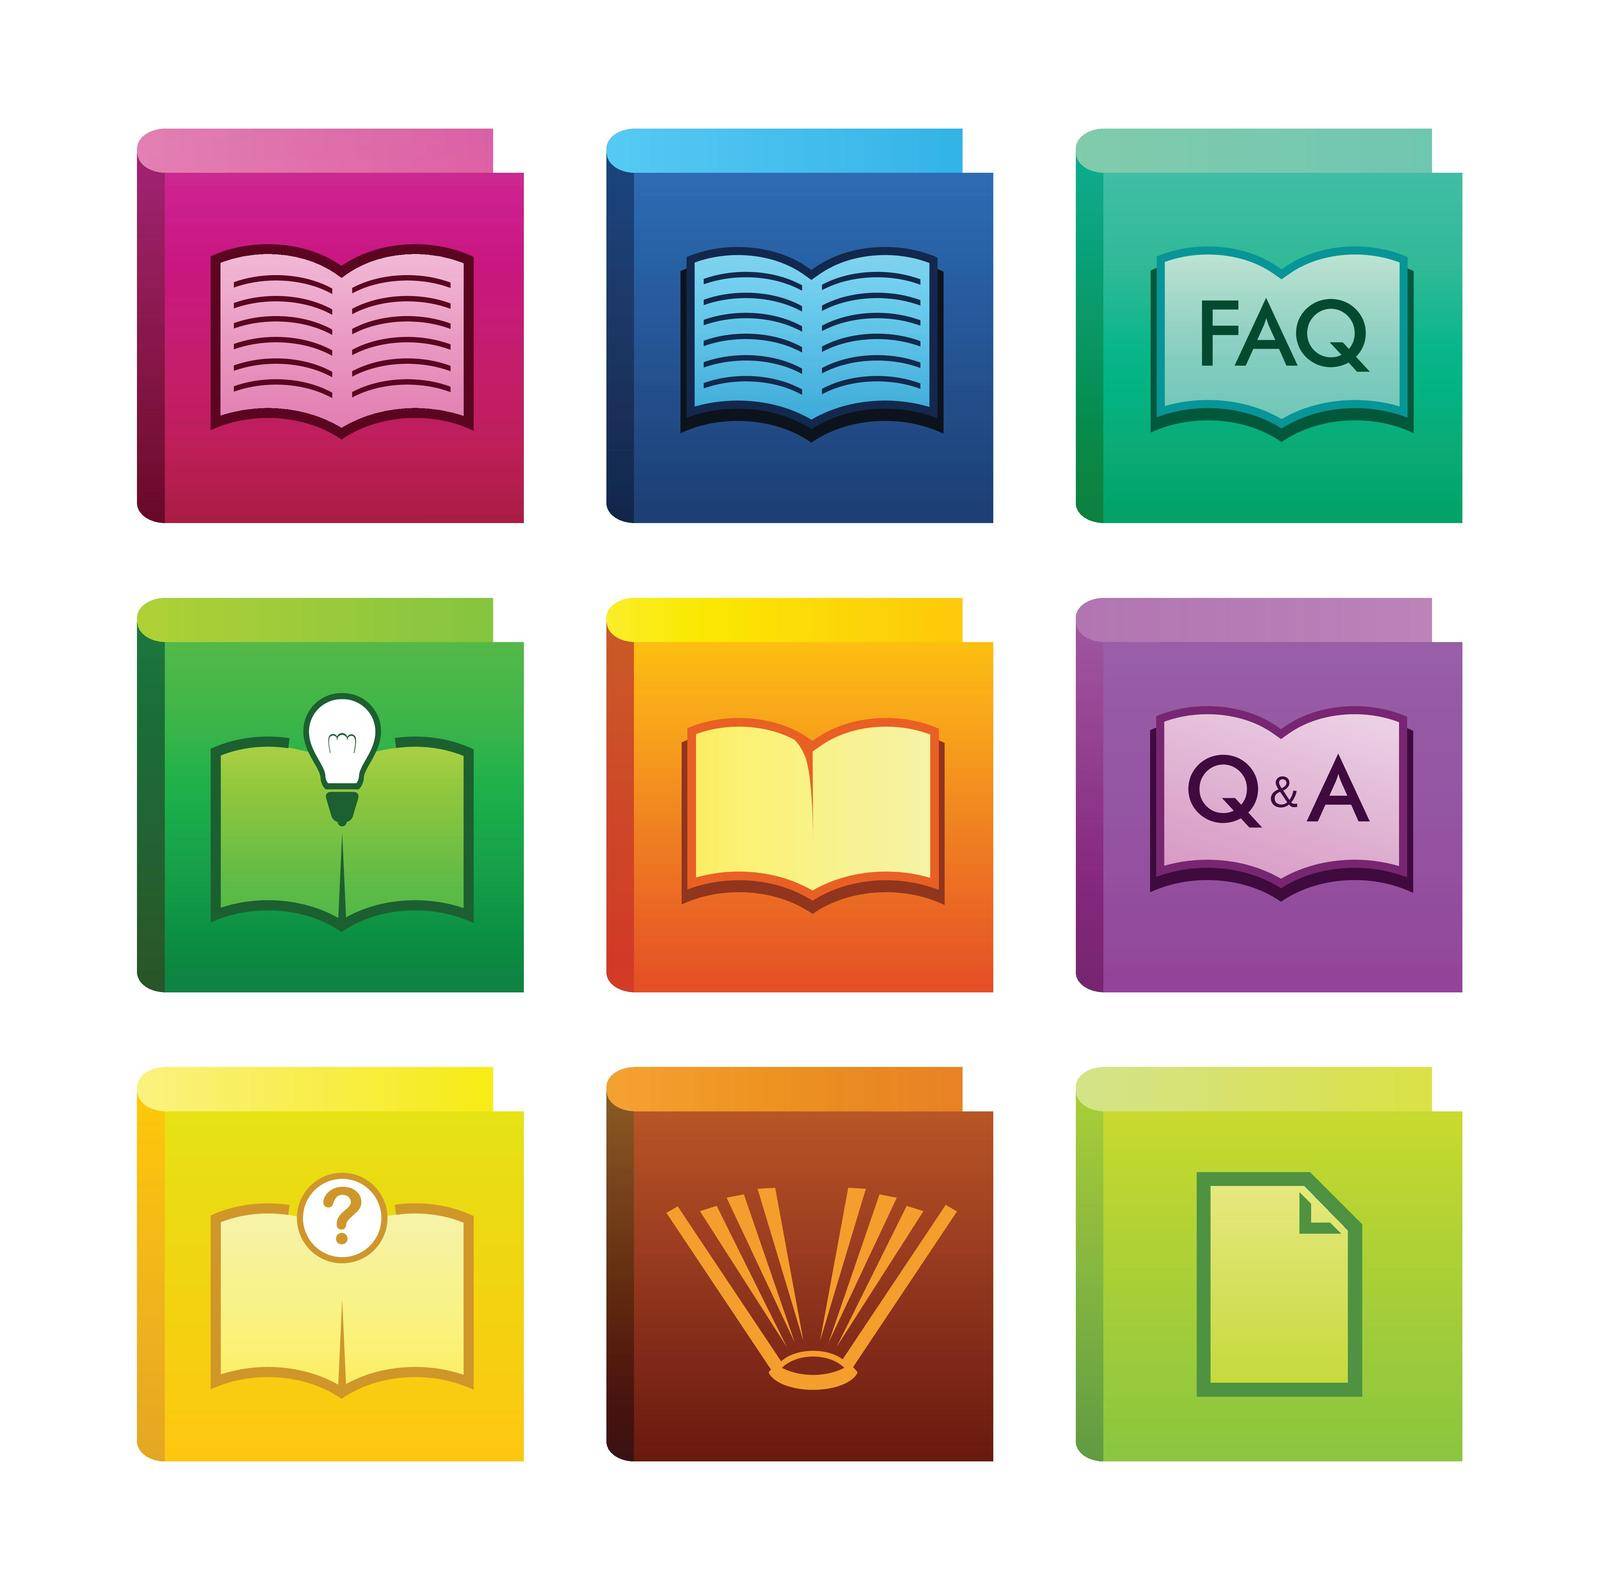 Set of Book icons, documents for business and education, Vector Illustrations isolated on white background